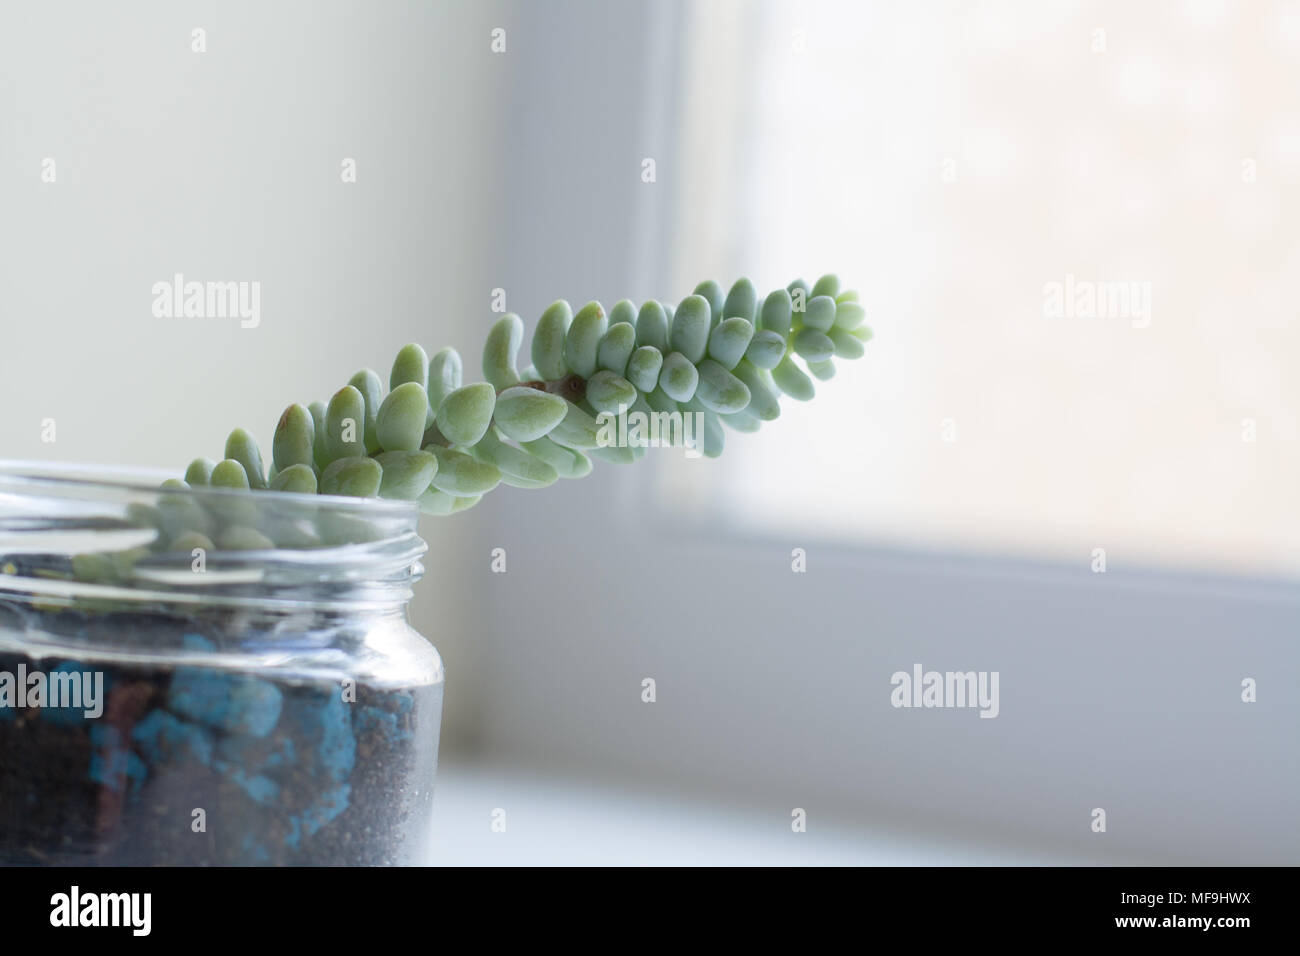 Sedum morganianum succulent plant sprout isolated on white background near window Stock Photo